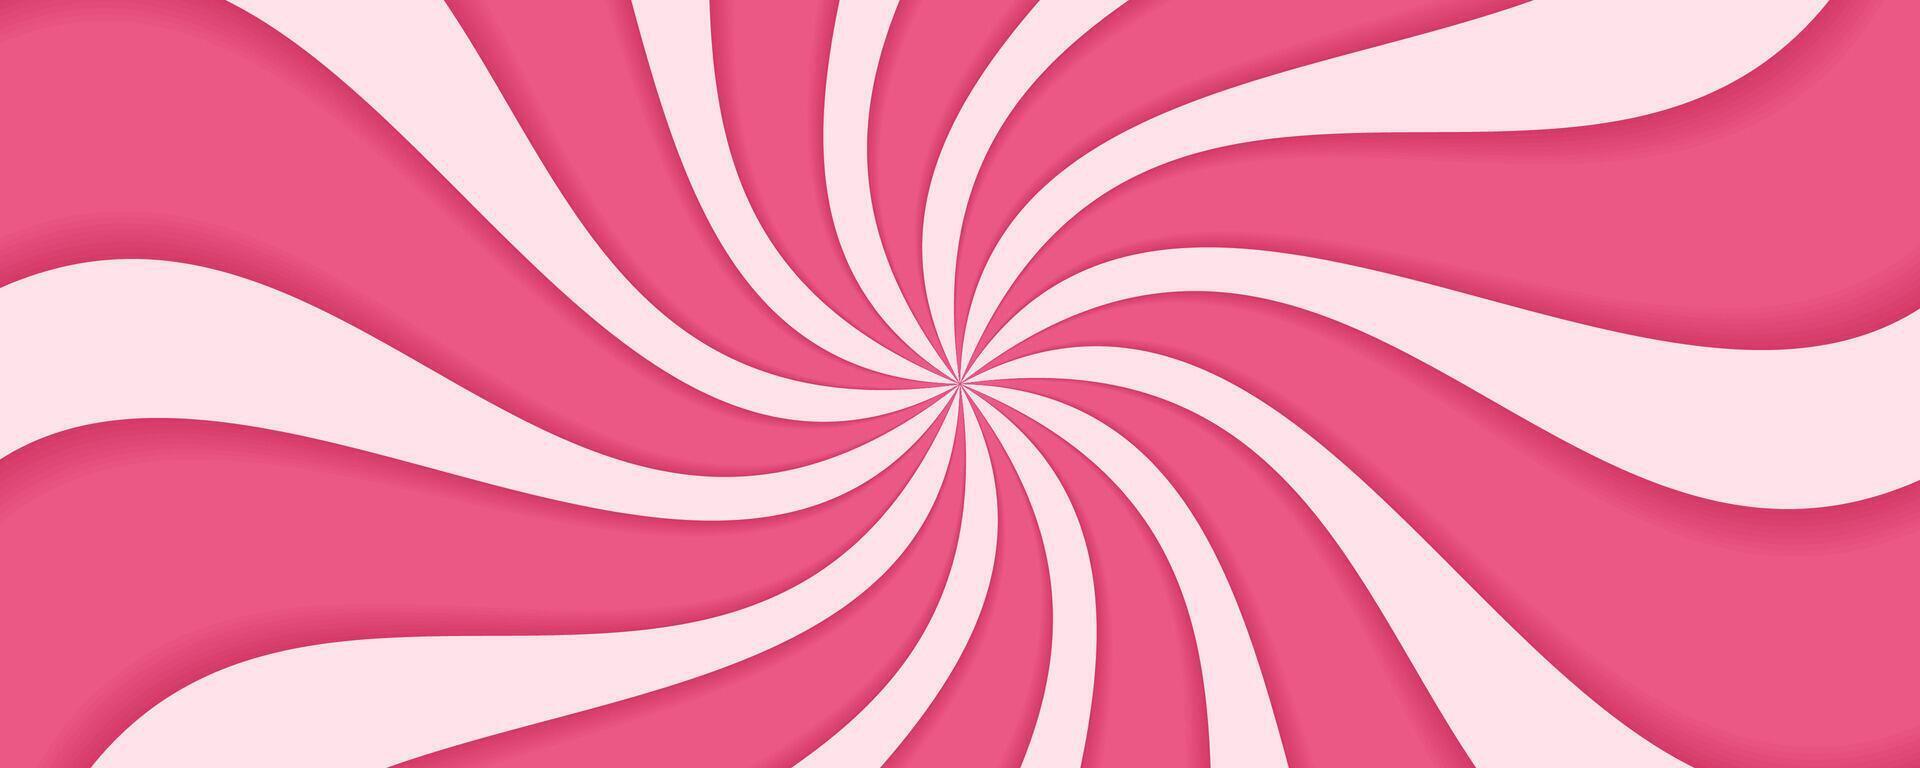 Pink swirl candy background. Sweet strawberry ice cream pattern. Spiral sunburst wallpaper. Cartoon marshmallow and lollipop texture. Radial striped vortex for psychedelic groovy design. vector